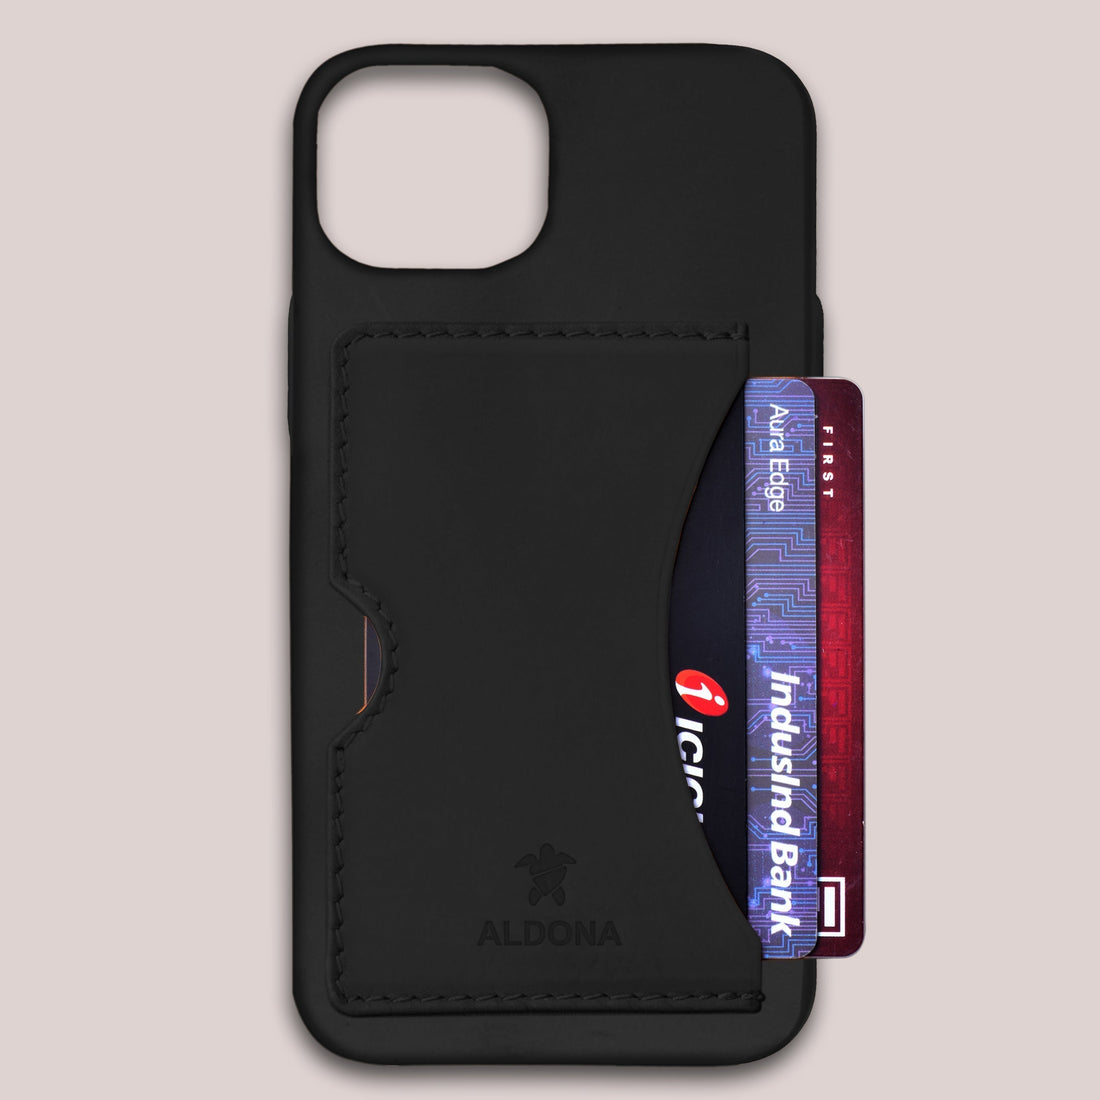 Baxter Card Case for iPhone 12 Pro Max - Dark Soil